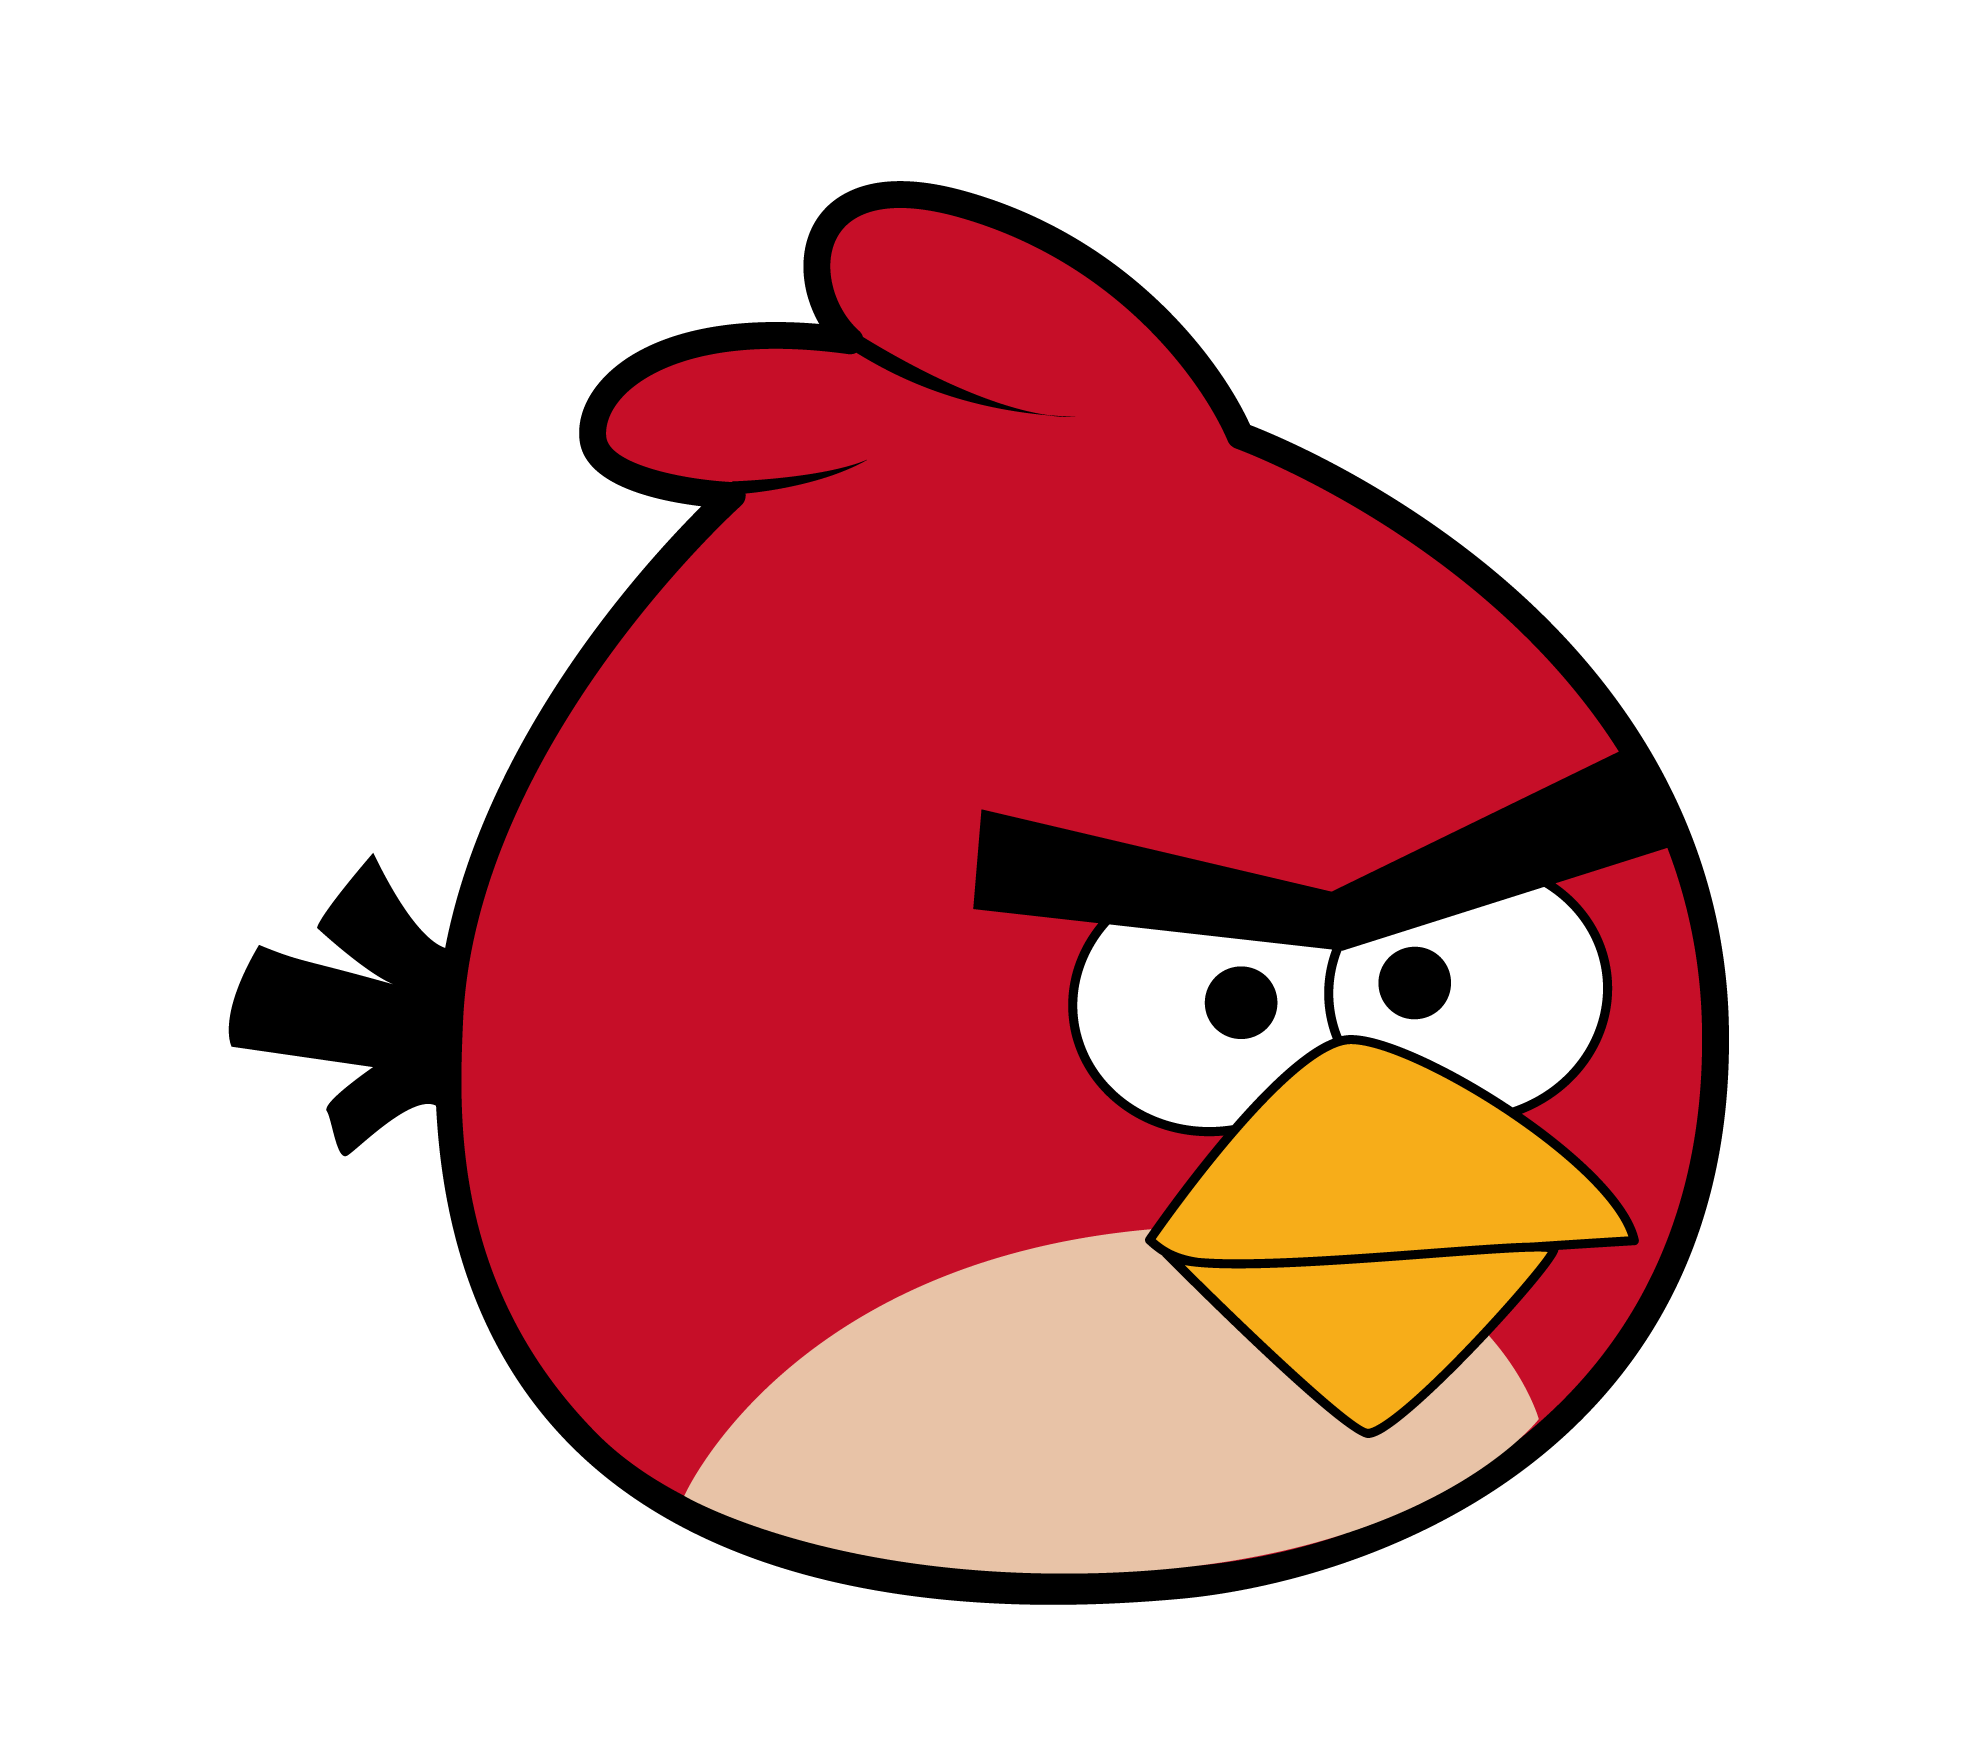 angry-bird-templates-clipart-best